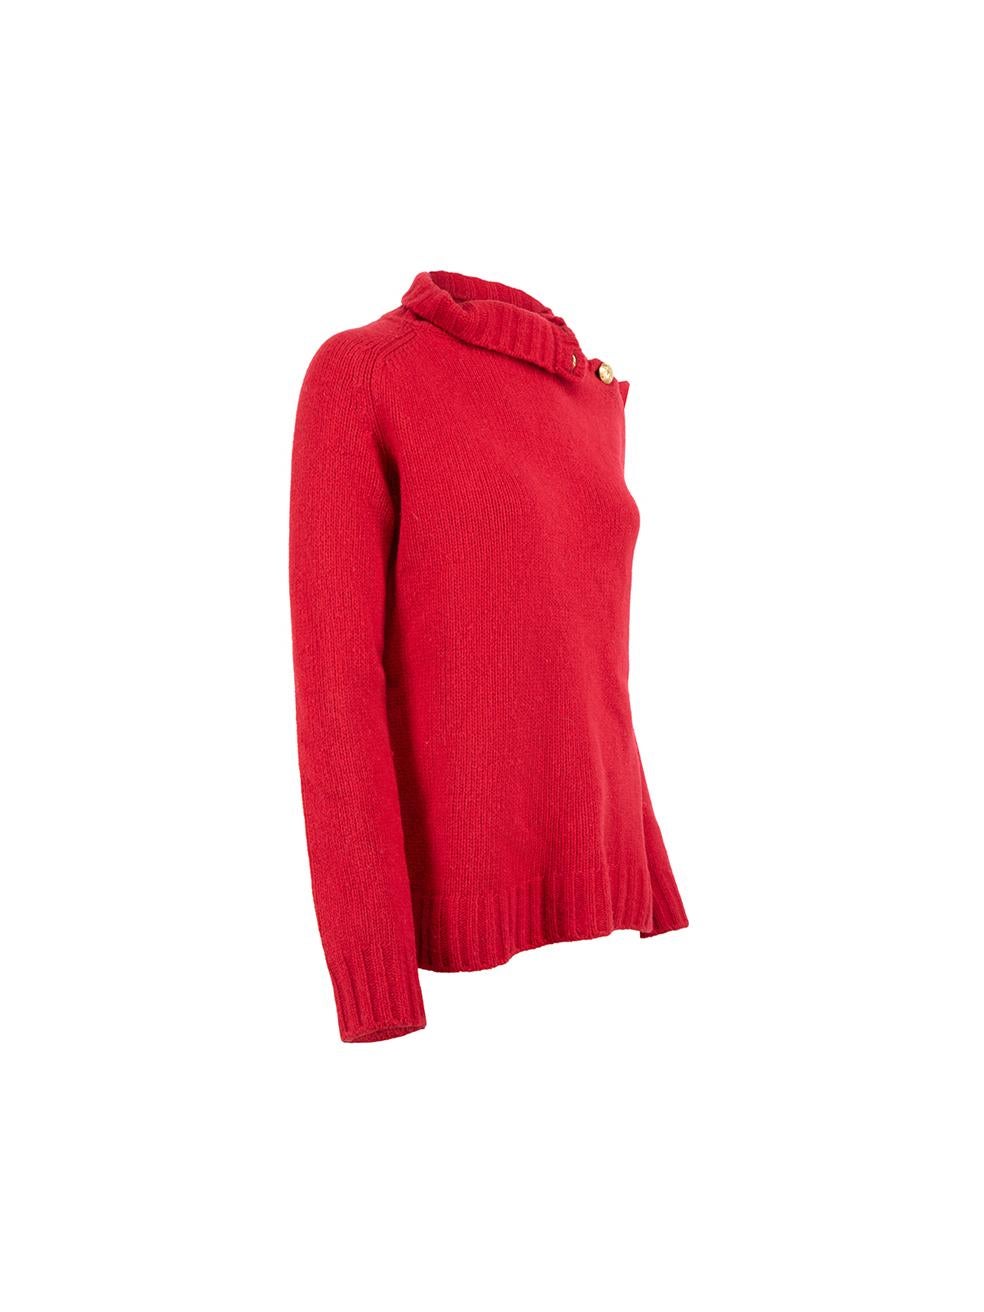 CONDITION is Good. Minor wear to jumper is evident. Light wear to the front with small hole to the knit and a missing button at the neck on this used Balmain designer resale item.

Details
Red
Wool
Knit jumper
Turtleneck
Long sleeves
Gold buttoned